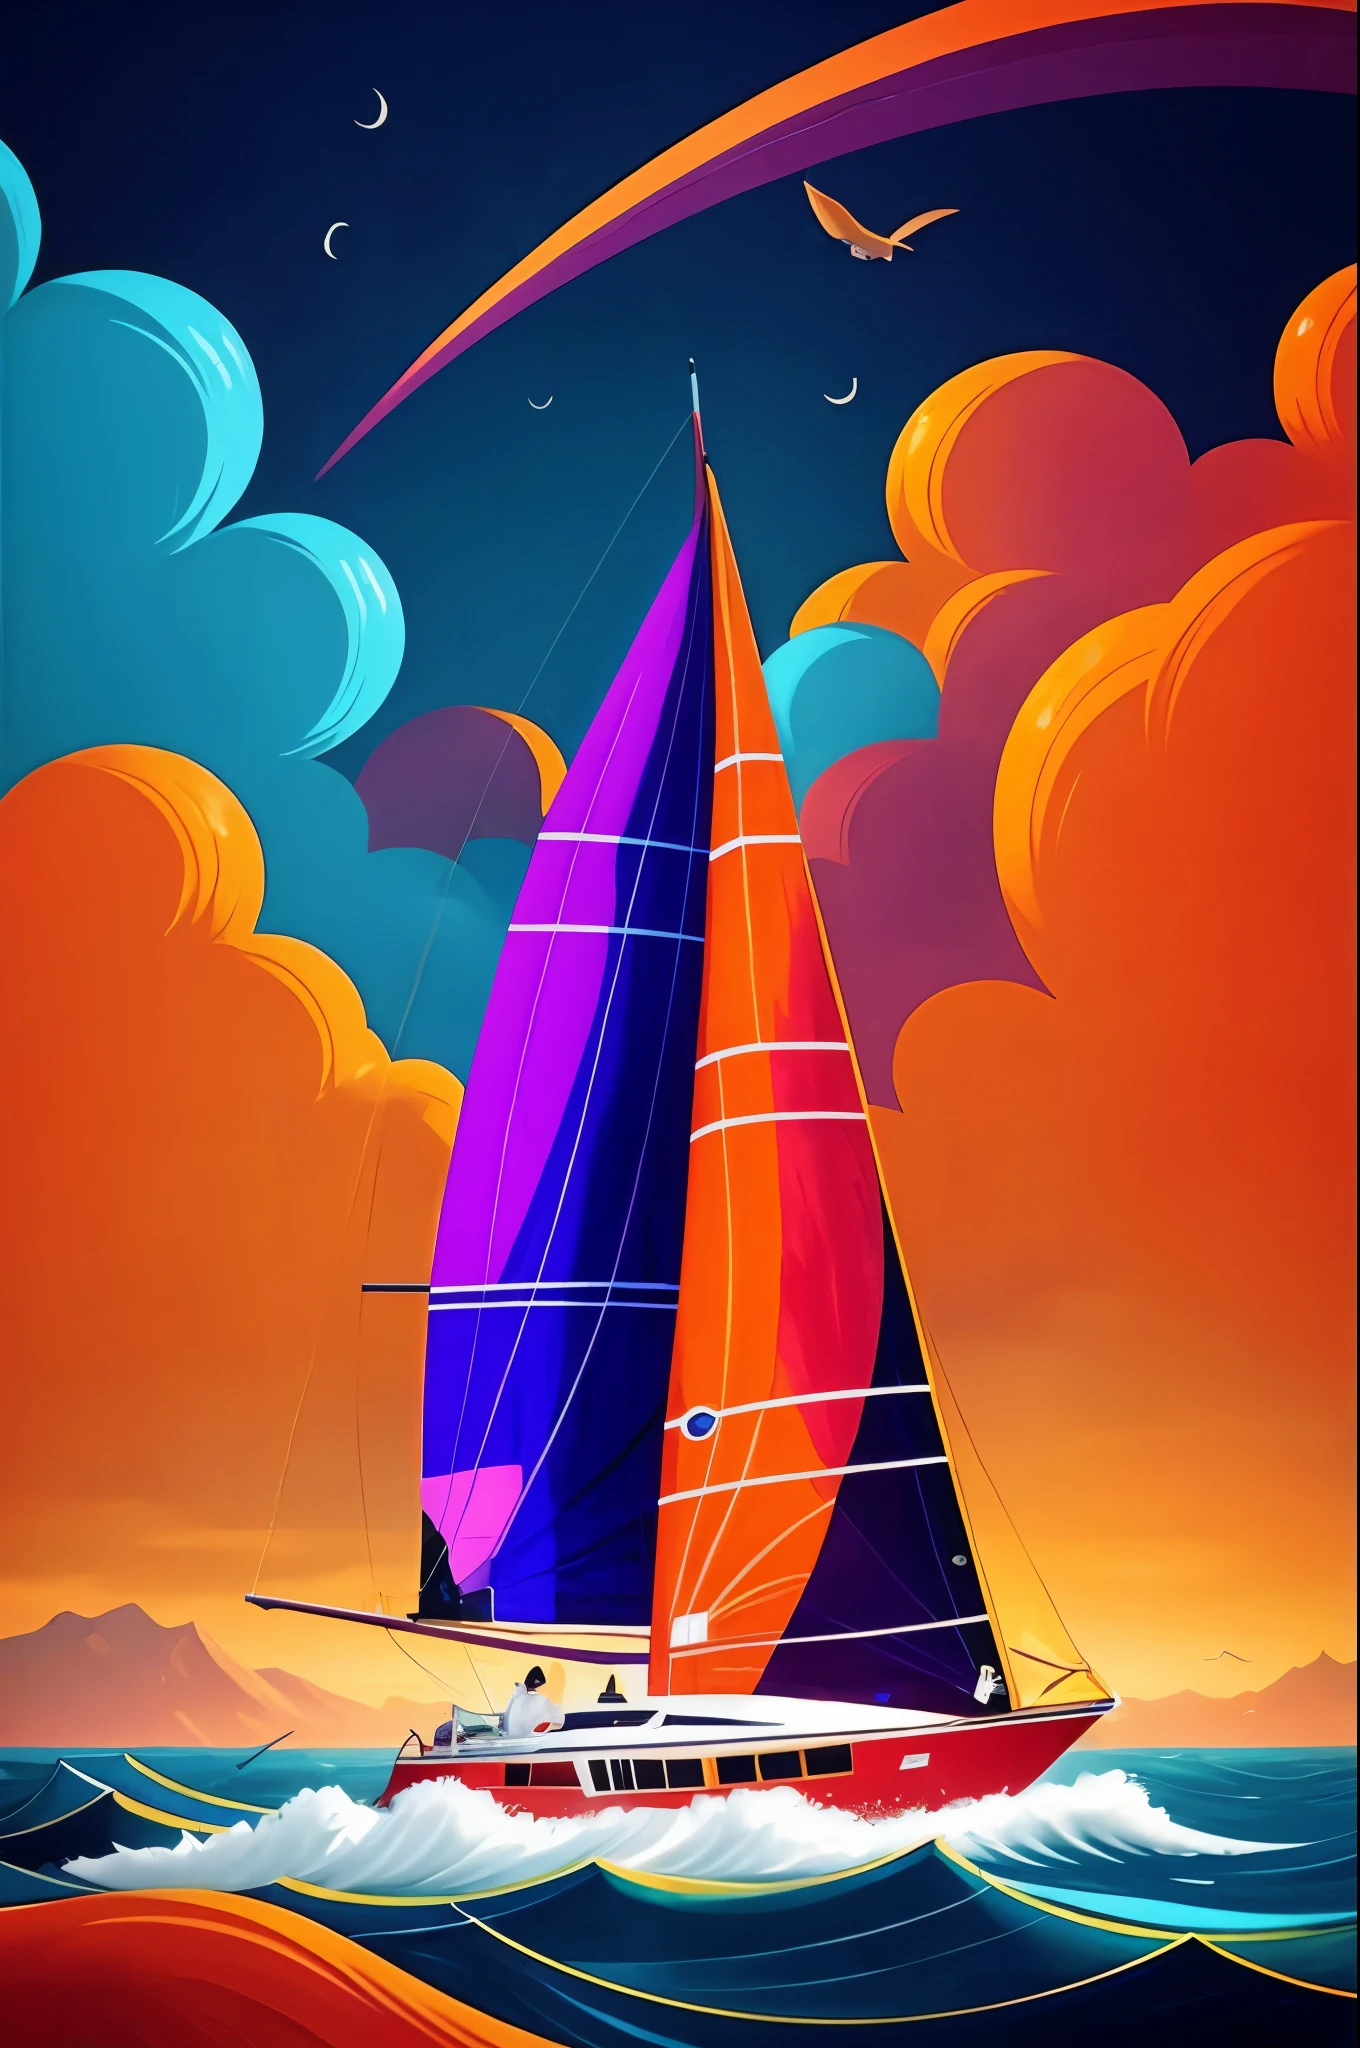 beautiful sunset colors, realistic waves, tranquil atmosphere, skilled brushwork, vibrant and vivid colors, calm and serene ocean.

masterpiece,sharp focus, highly detail, intricate detail on the sailing boat,